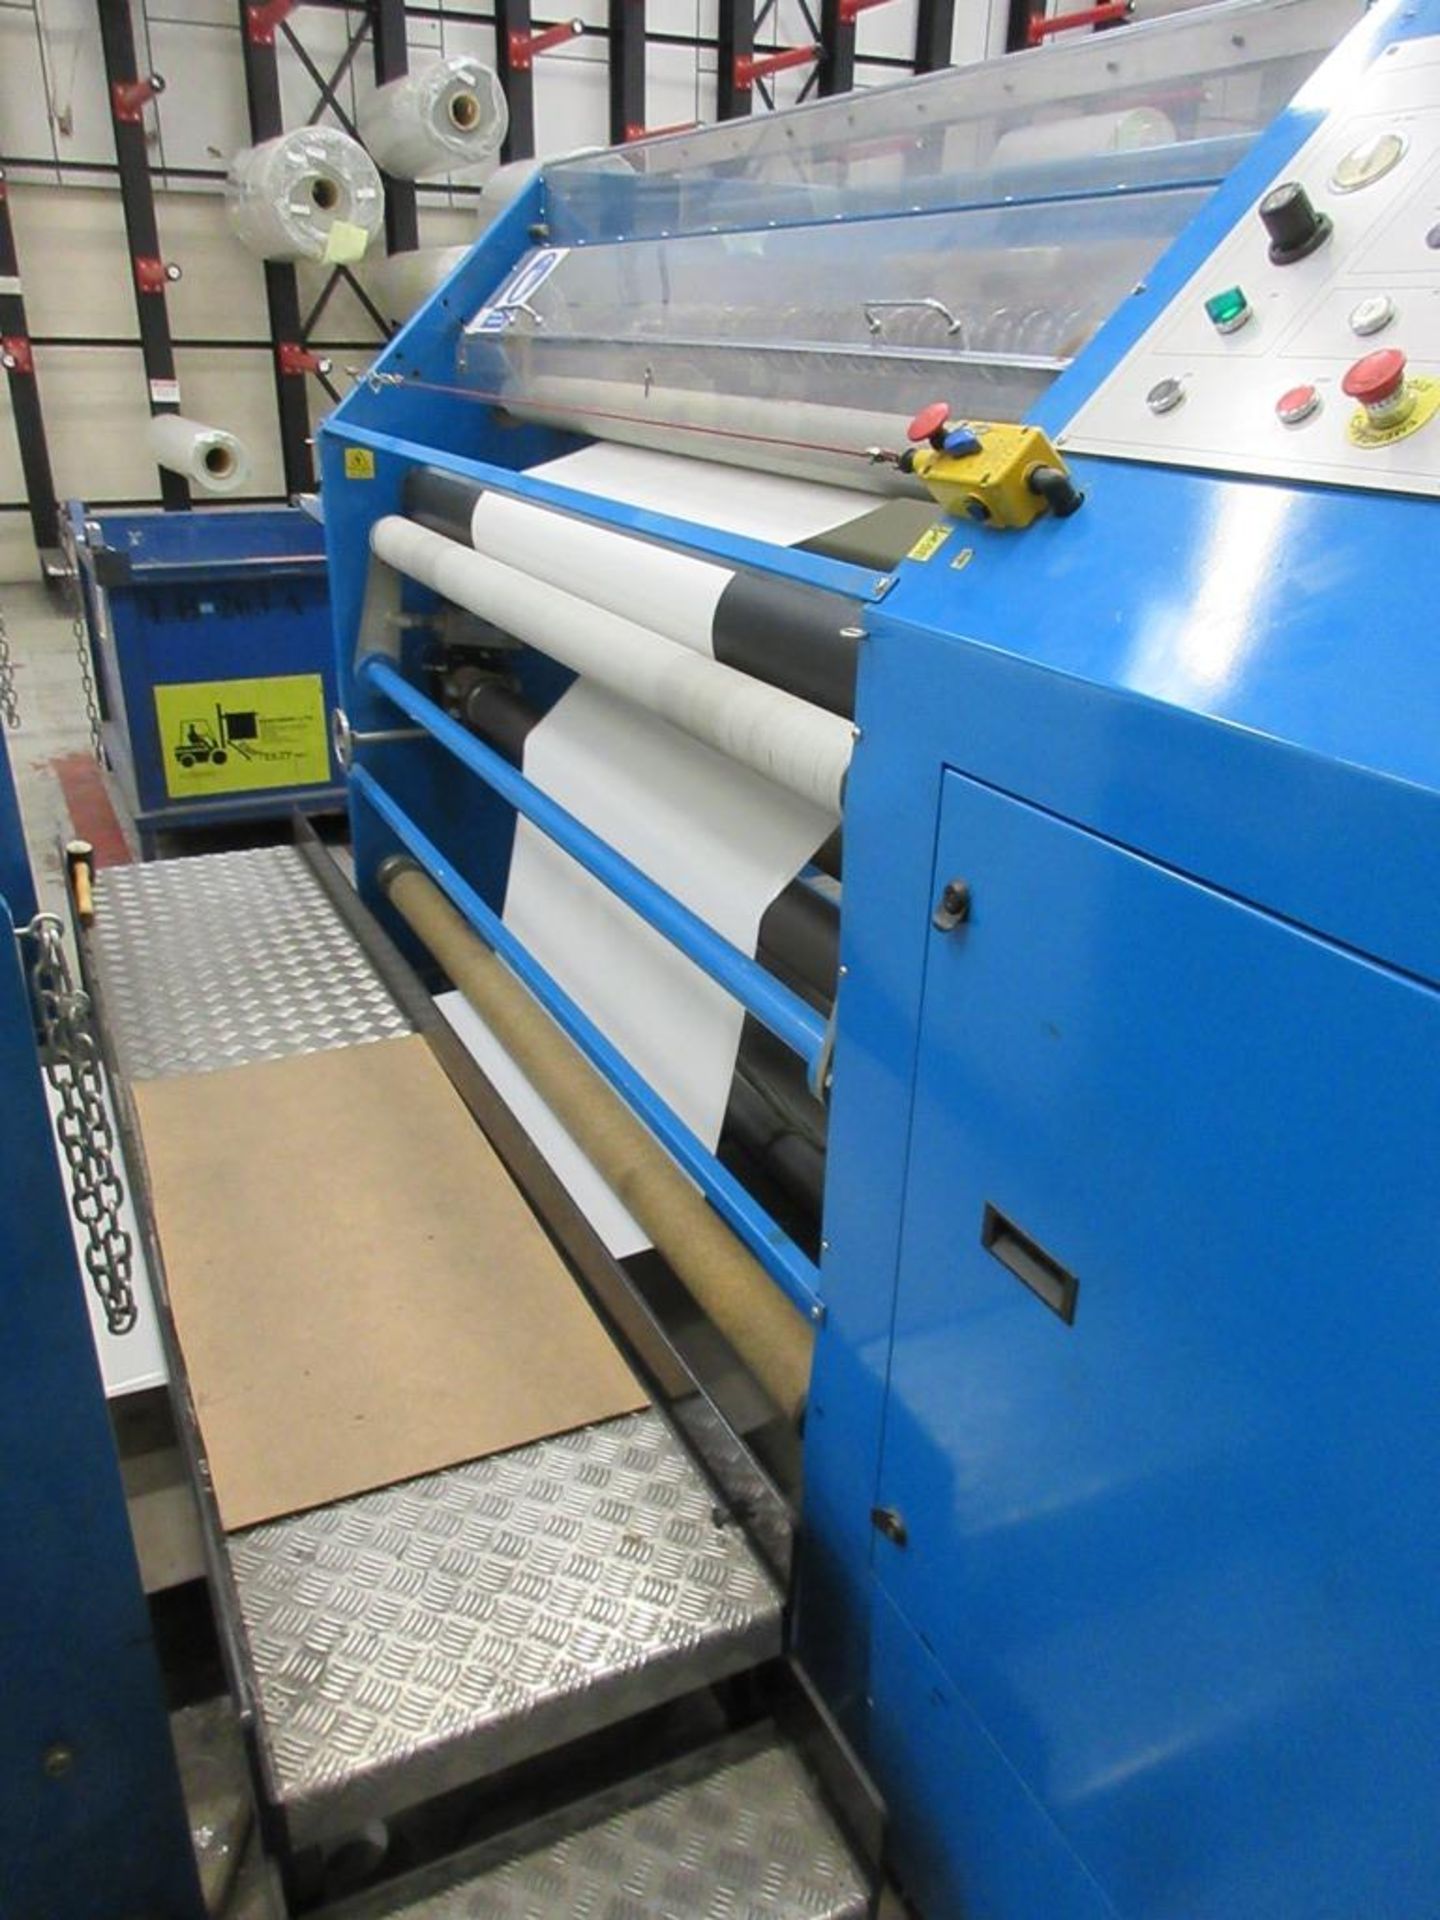 Elite Cameron CW600 automatic slitting machine, s/n: MO2030 (2001), capacity 3000kg with - - Image 7 of 16